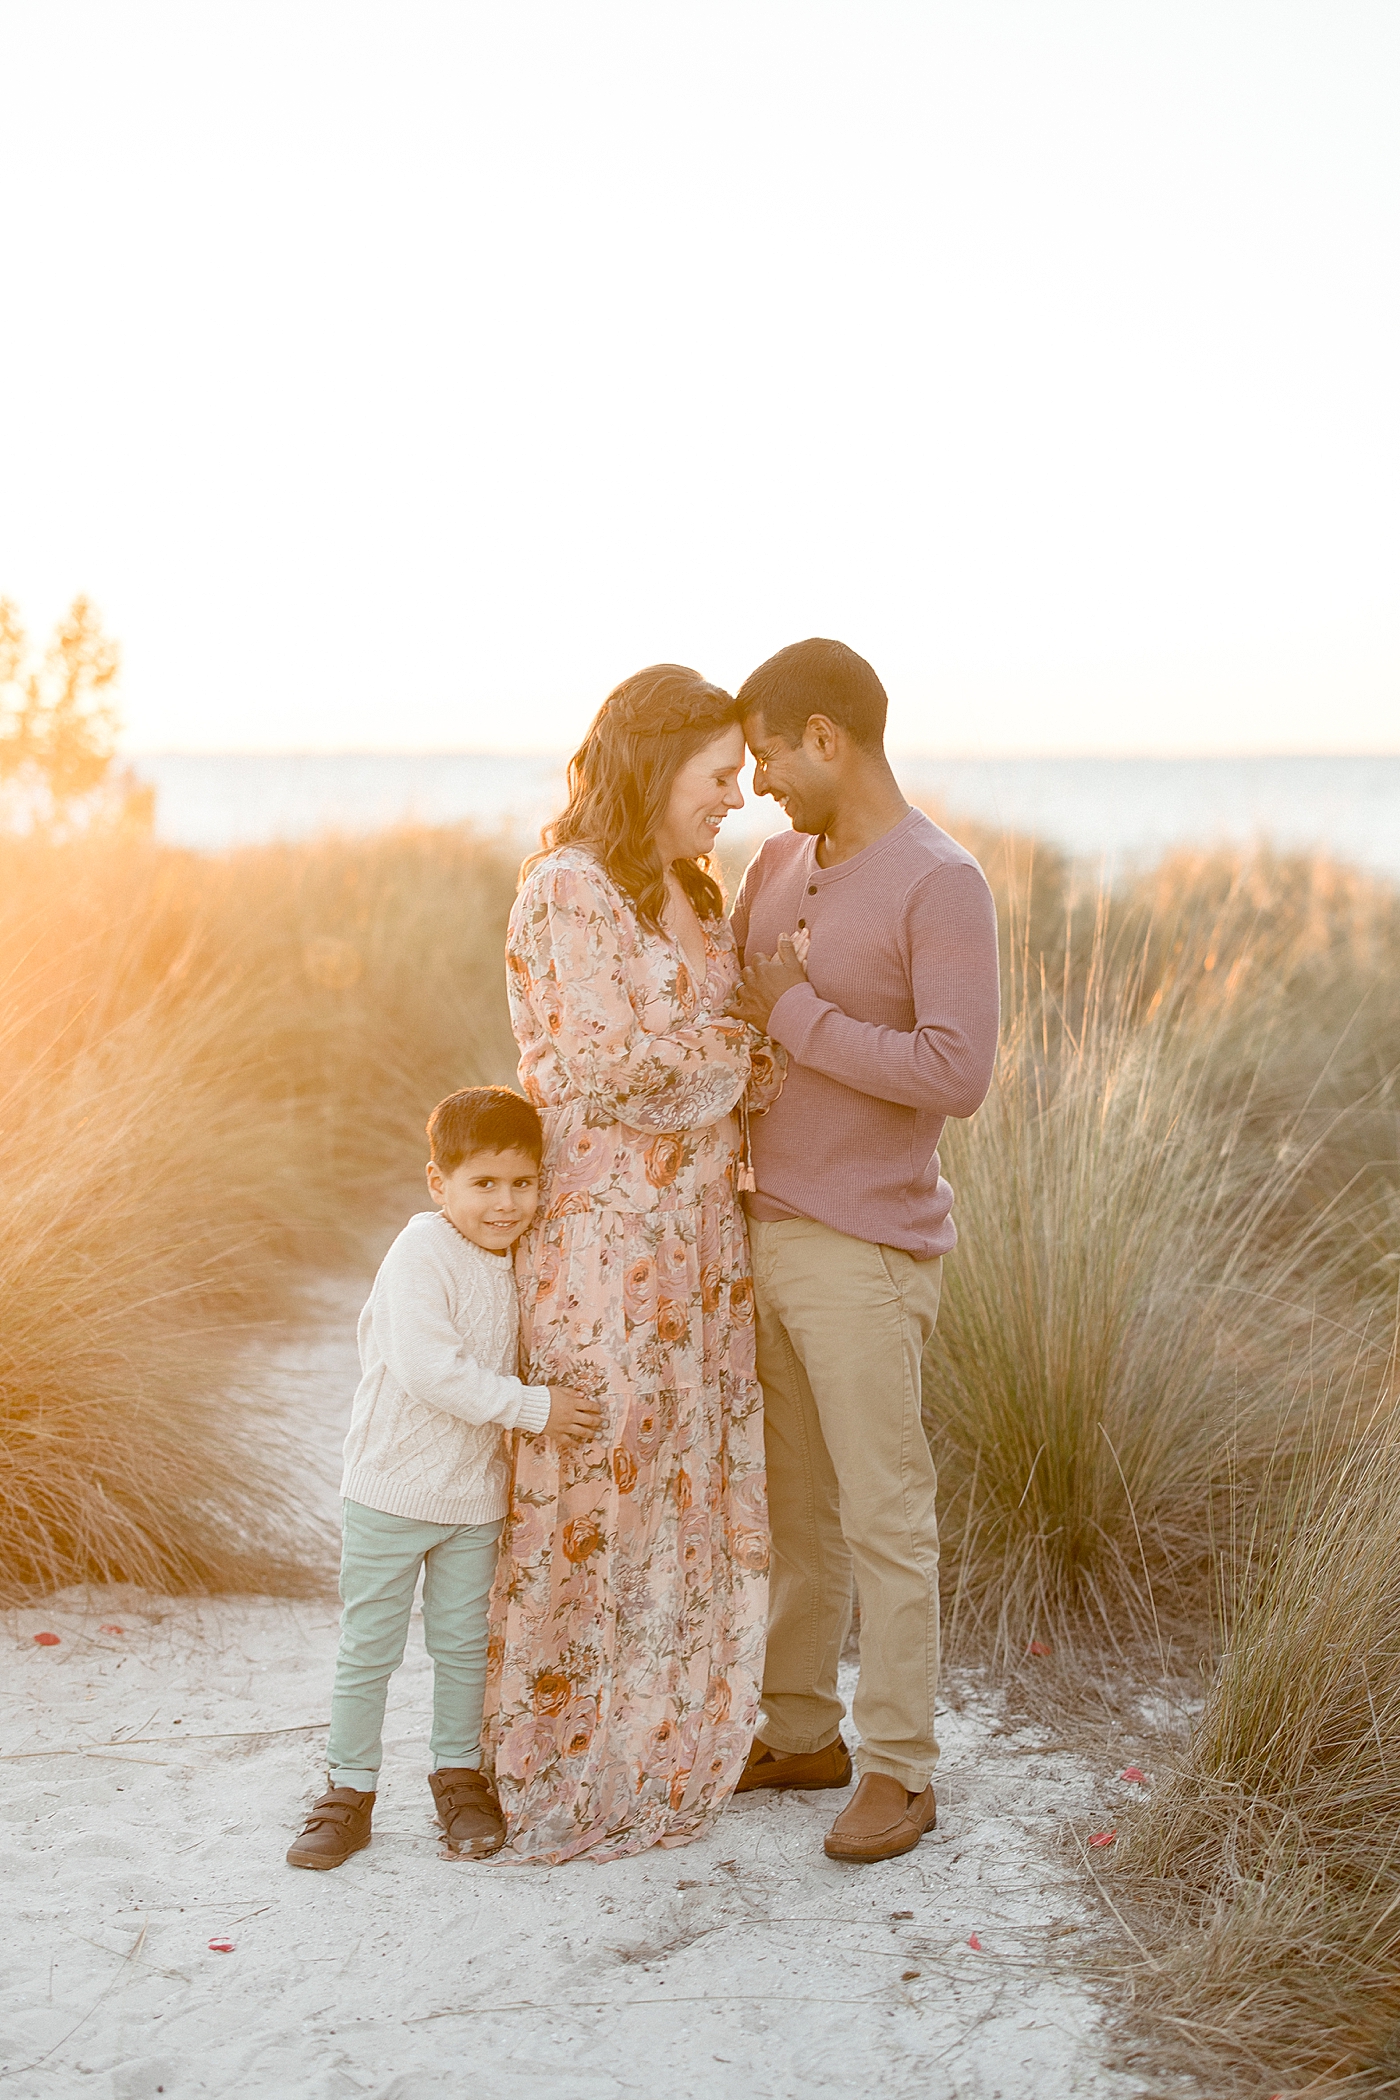 Mom and Dad looking at each other with son standing beside them. Photo by Brittany Elise Photography.